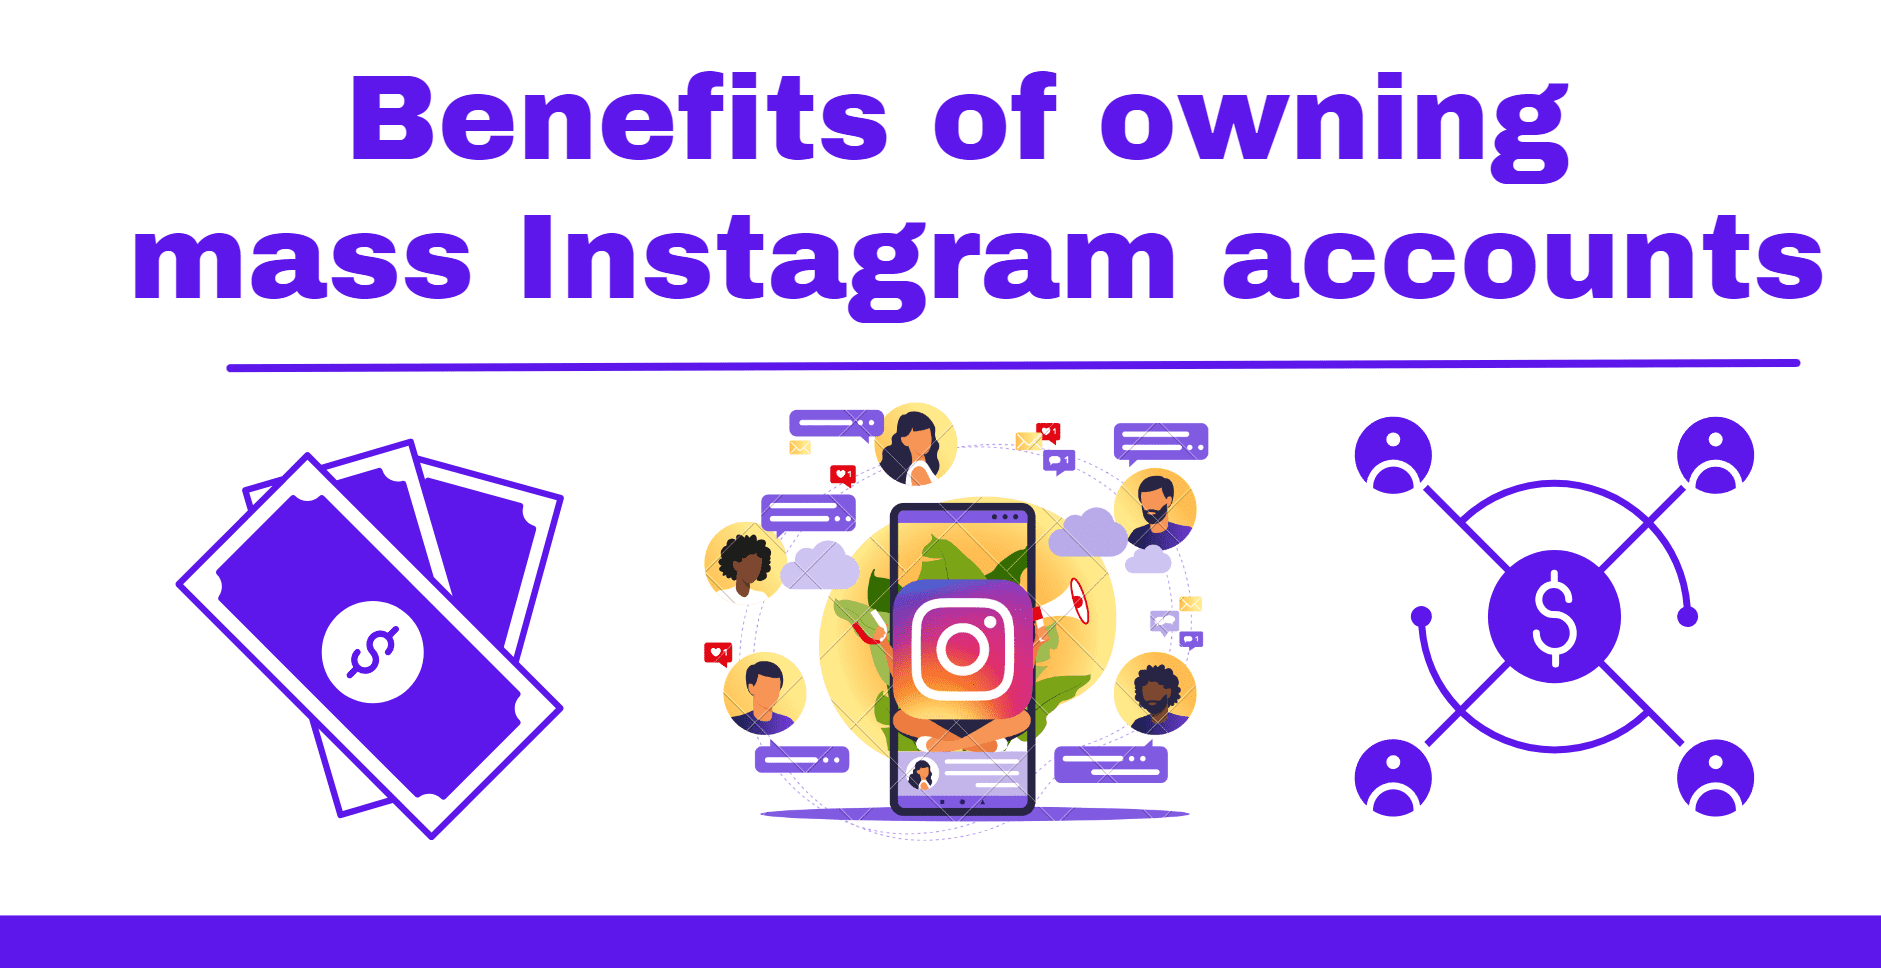 Benefits of owning mass Instagram accounts